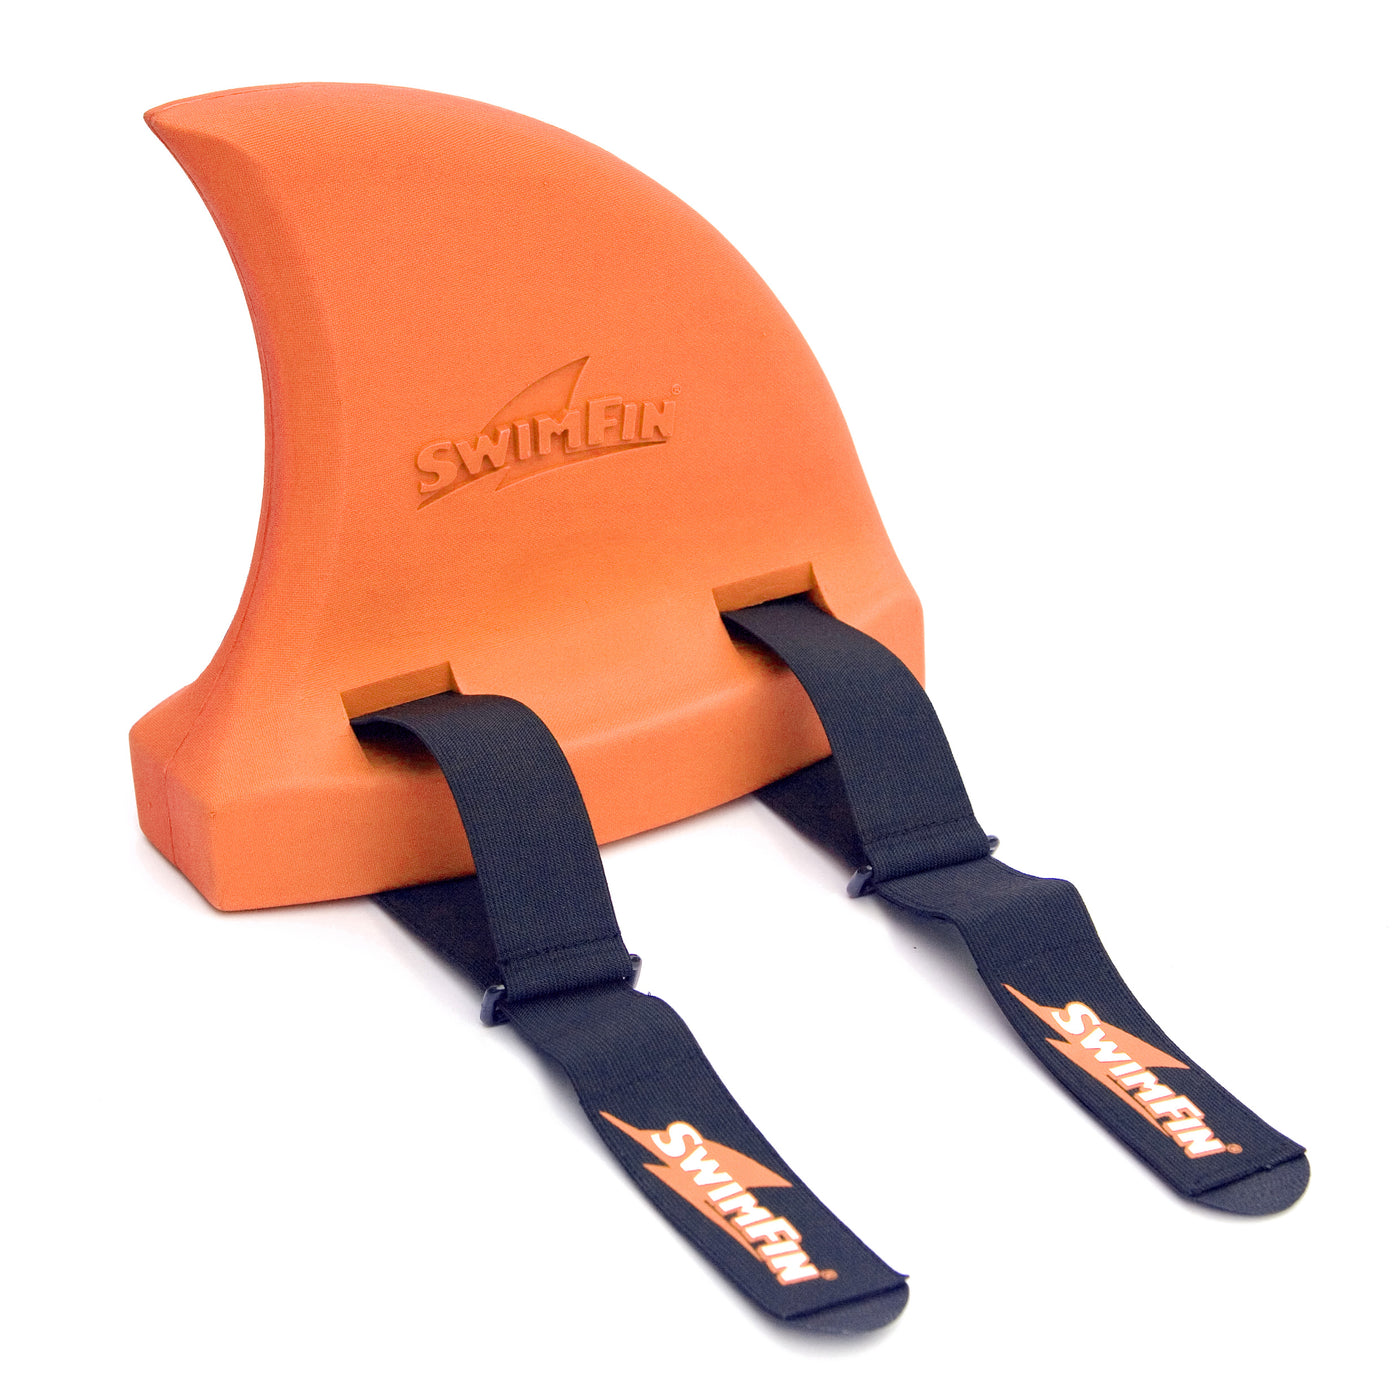 SwimFin in orange, the Shark Fin for Children learning to swim, a safety swimming aid and flotation device.